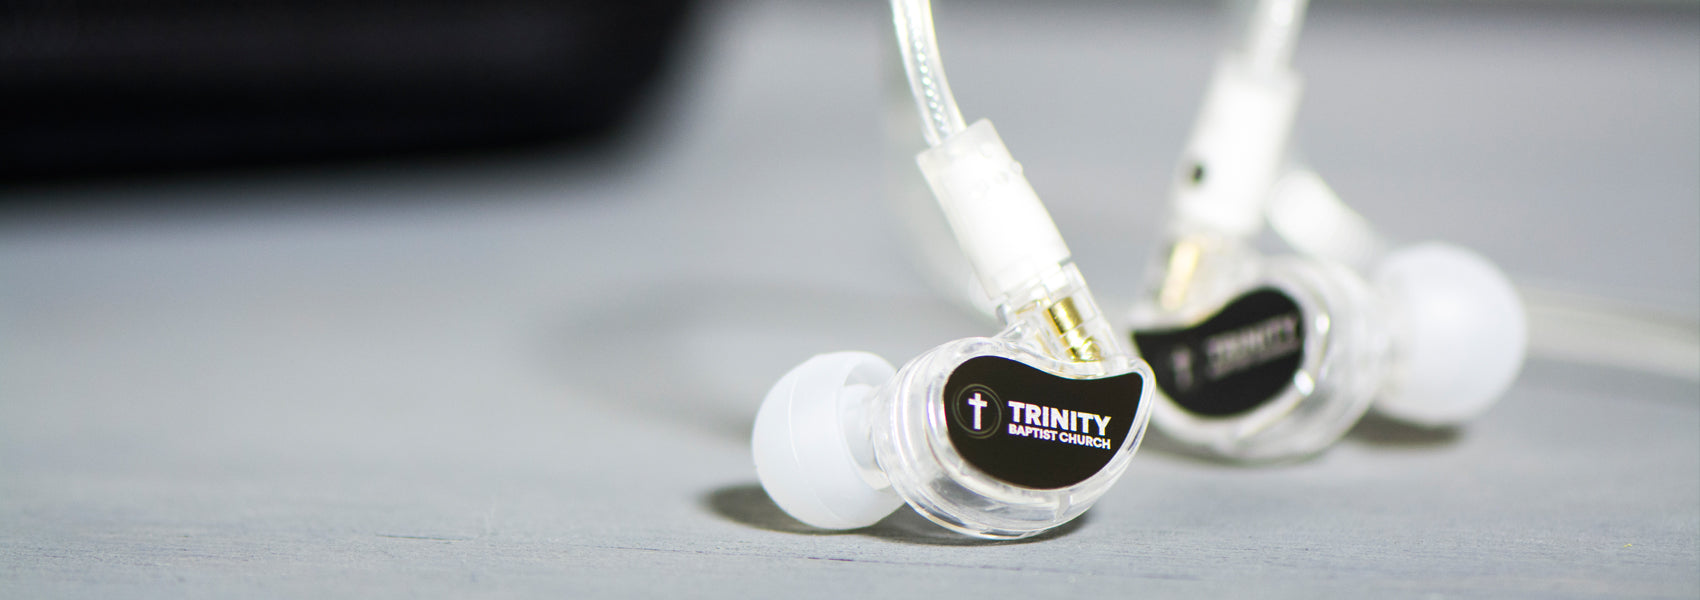 Close-up of clear, in-ear headphones with white cables and logo "trinity audio engineering" on a gray surface.